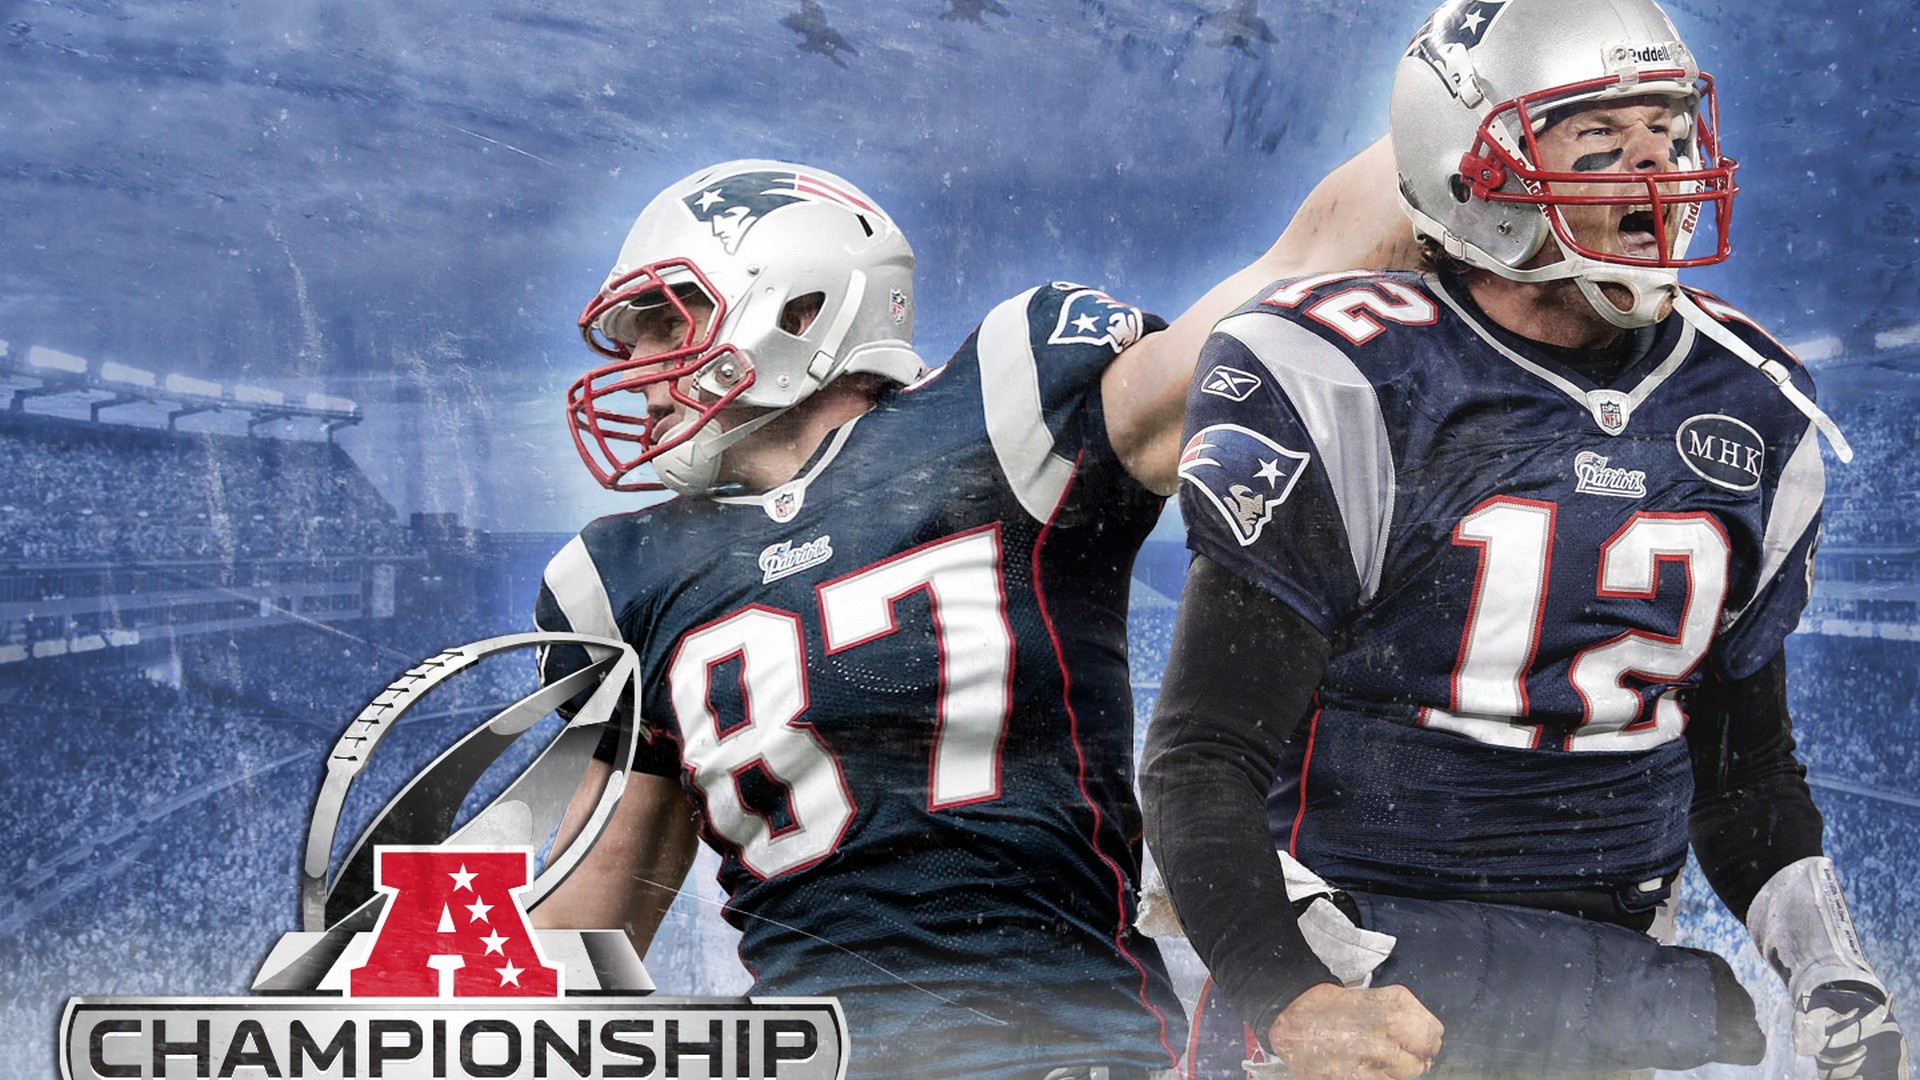 Patriots Mac Backgrounds with resolution 1920x1080 pixel. You can make this wallpaper for your Mac or Windows Desktop Background, iPhone, Android or Tablet and another Smartphone device